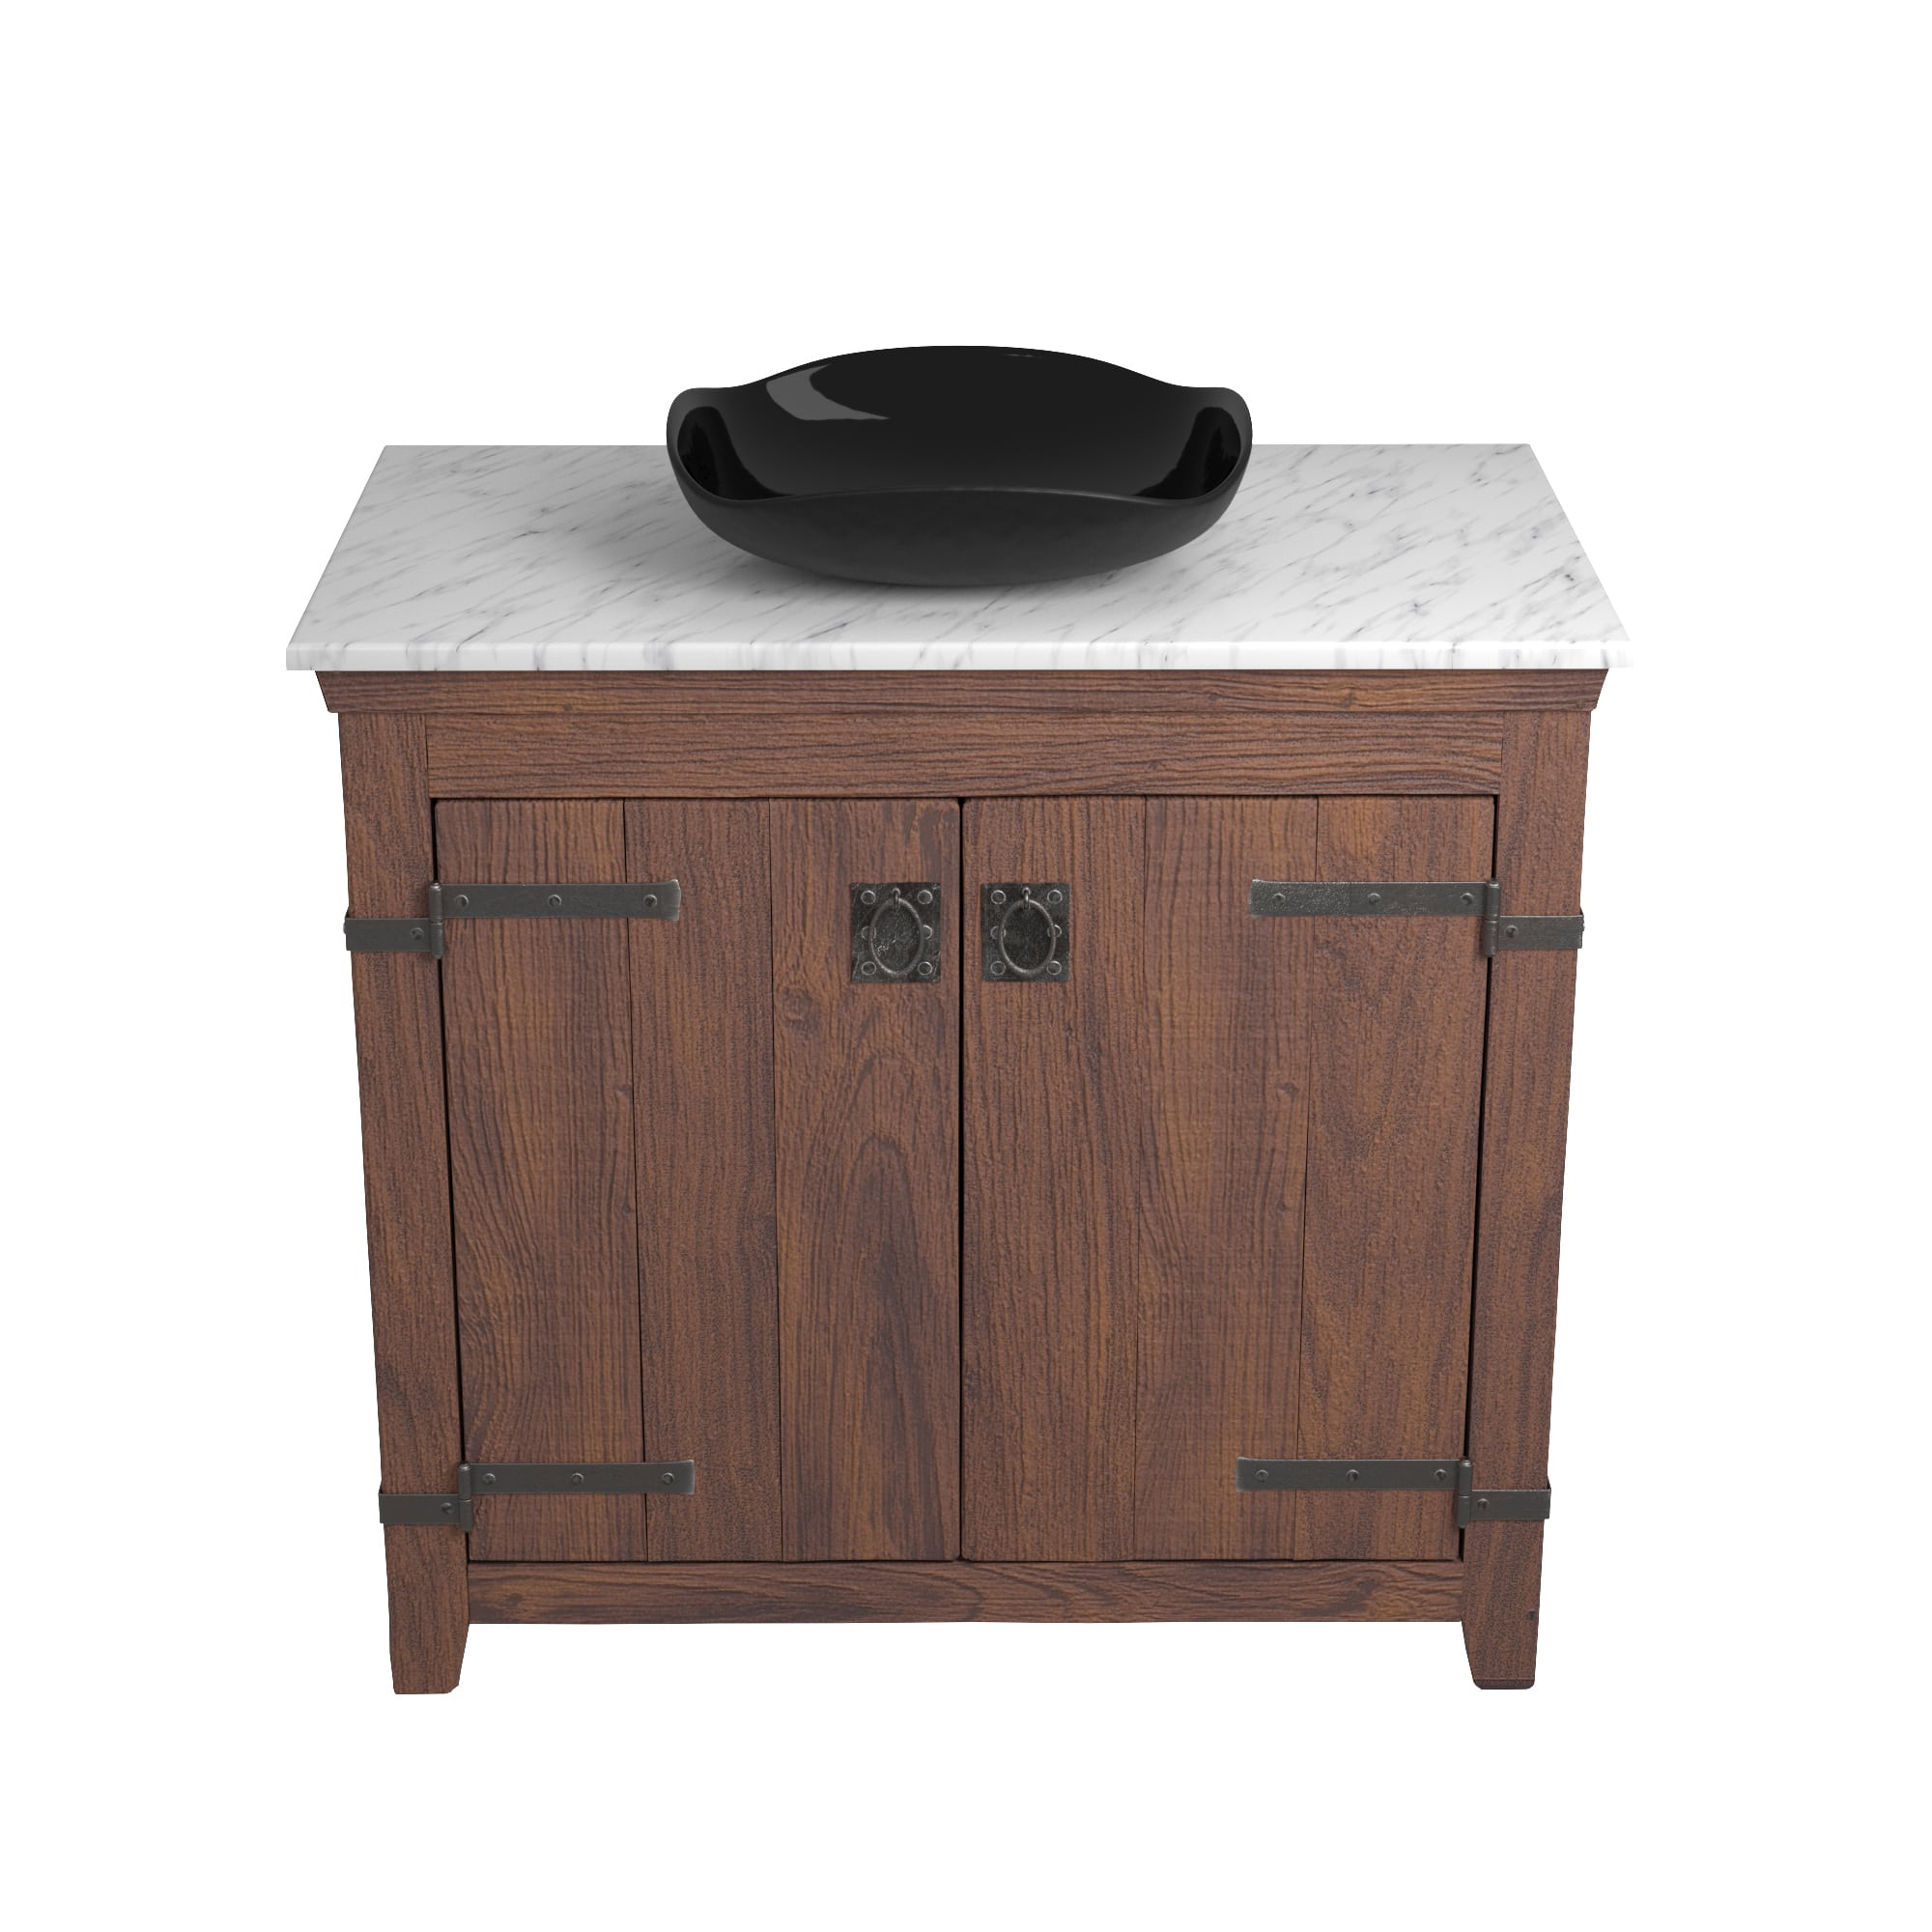 Native Trails 36" Americana Vanity in Chestnut with Carrara Marble Top and Lido in Abyss, Single Faucet Hole, BND36-VB-CT-MG-011